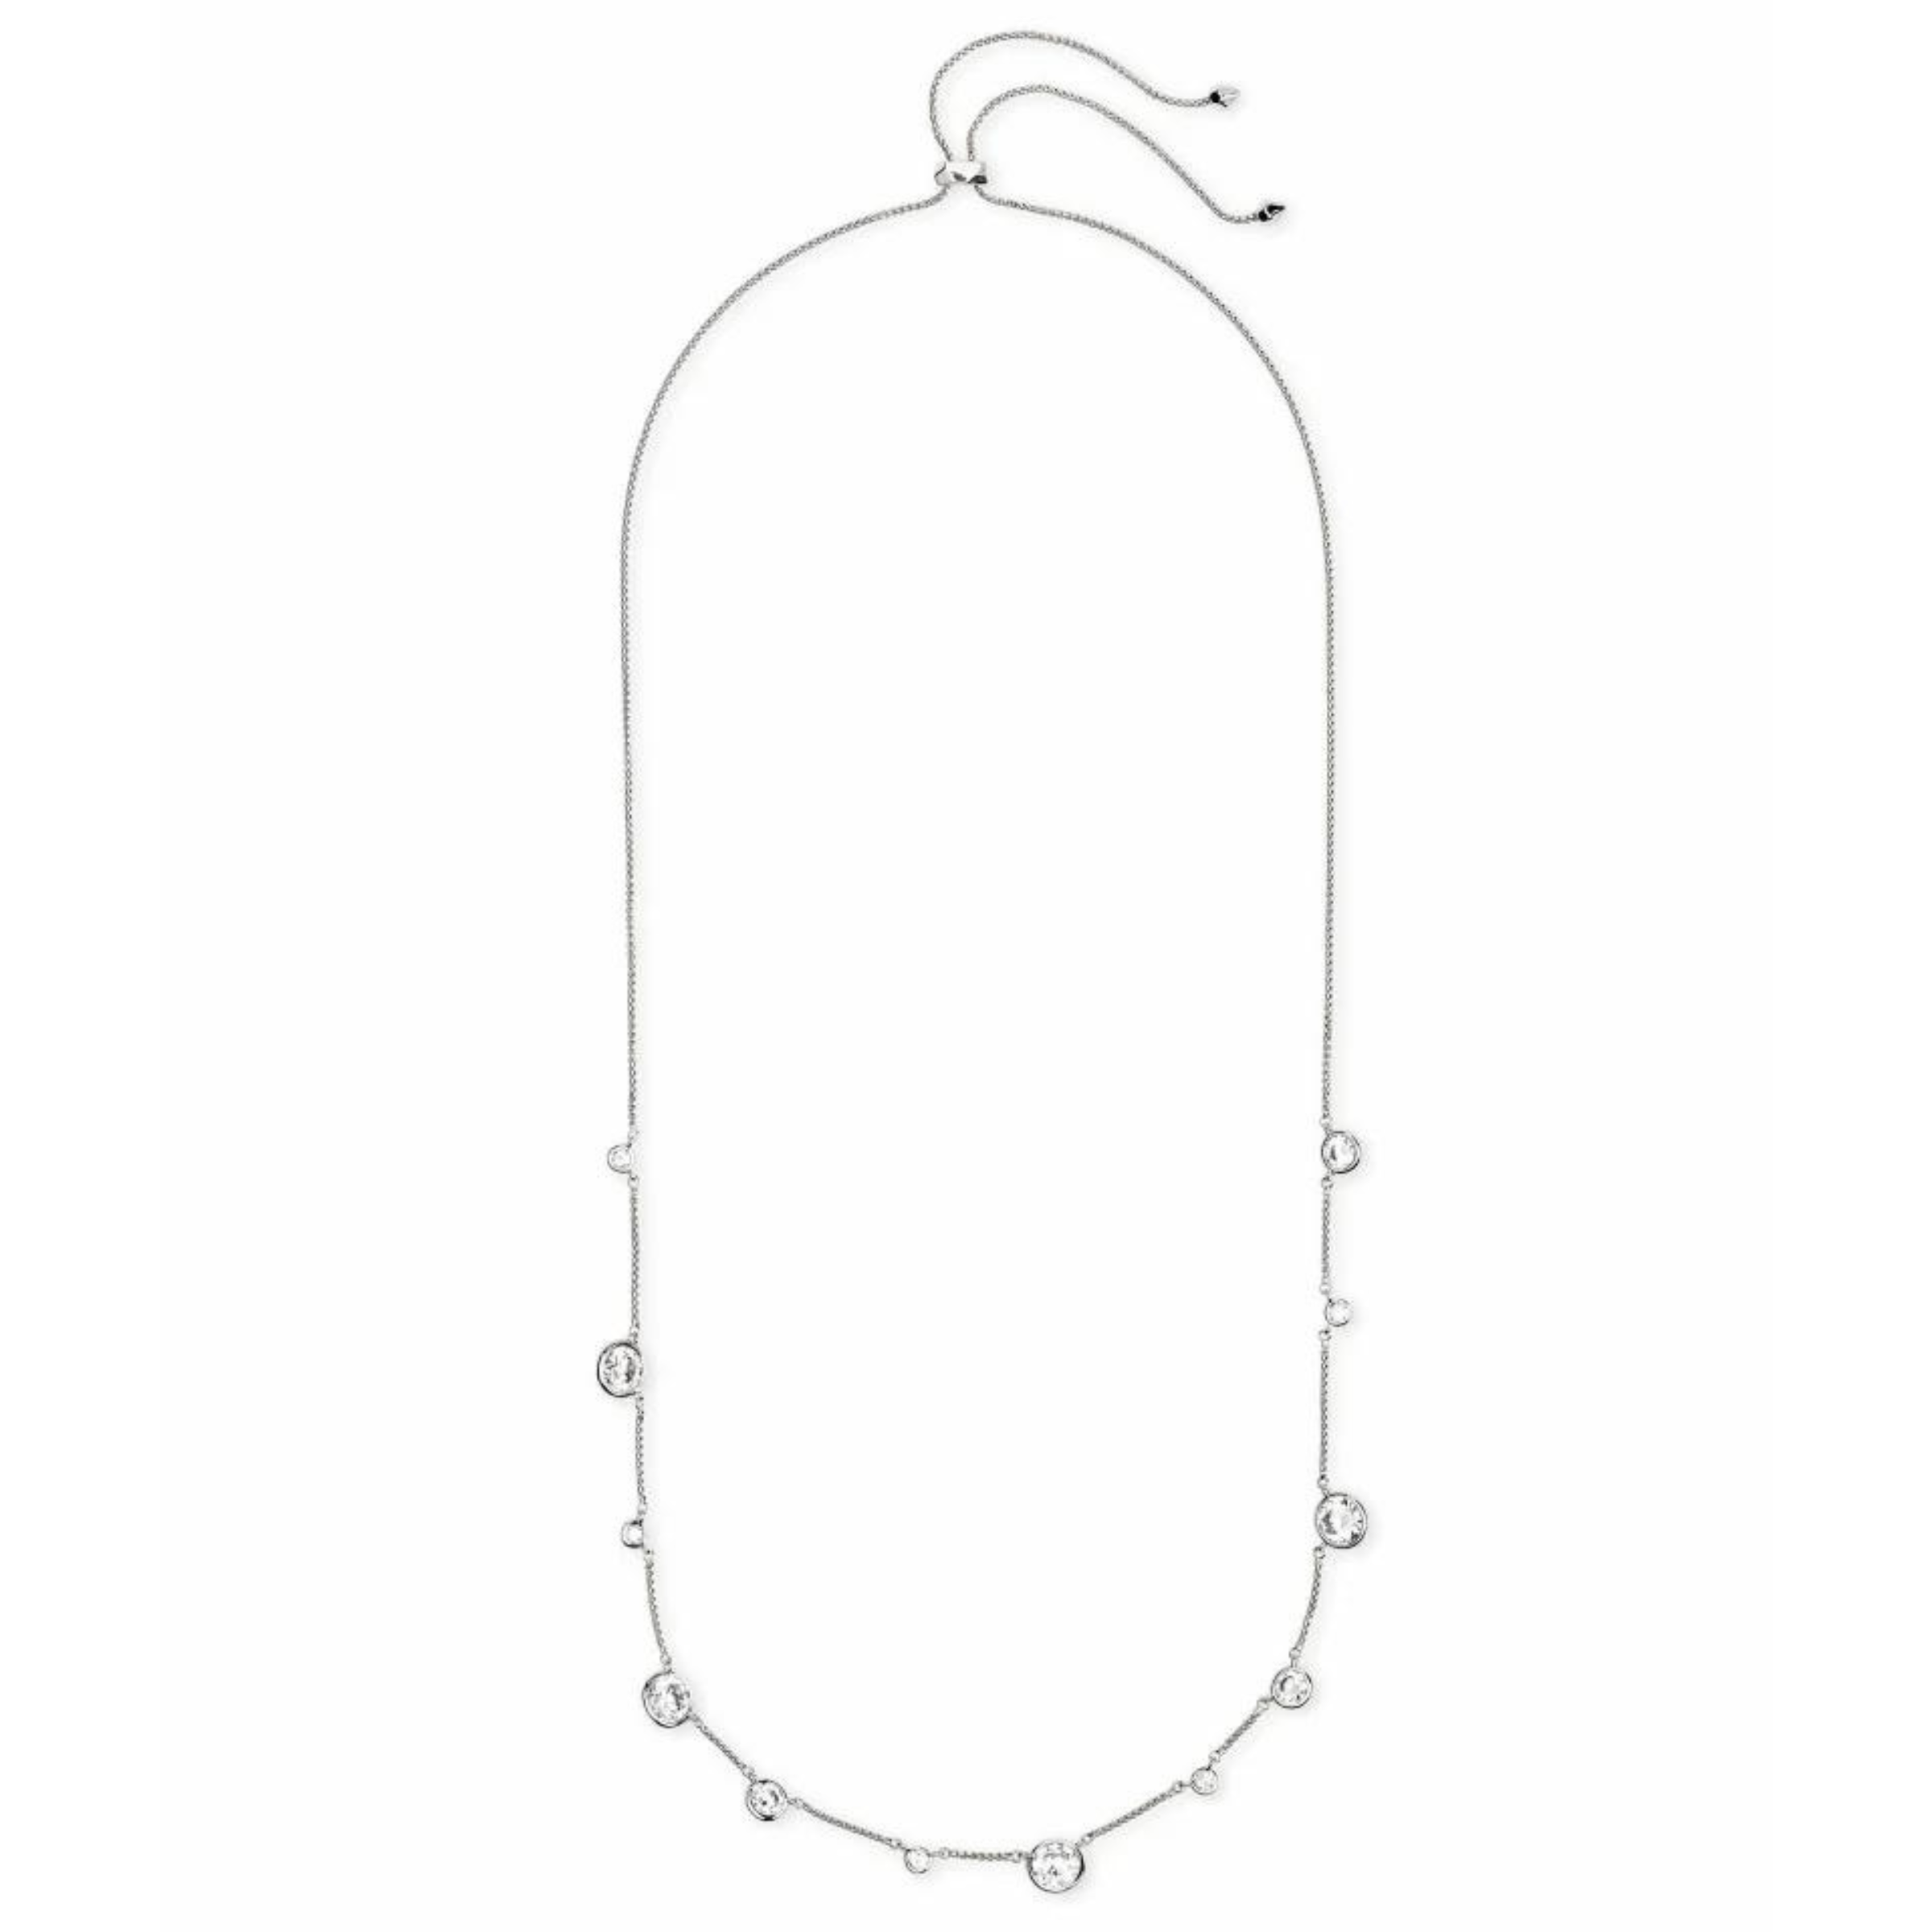 Kendra Scott | Clementine Choker Necklace in Silver - Giddy Up Glamour Boutique